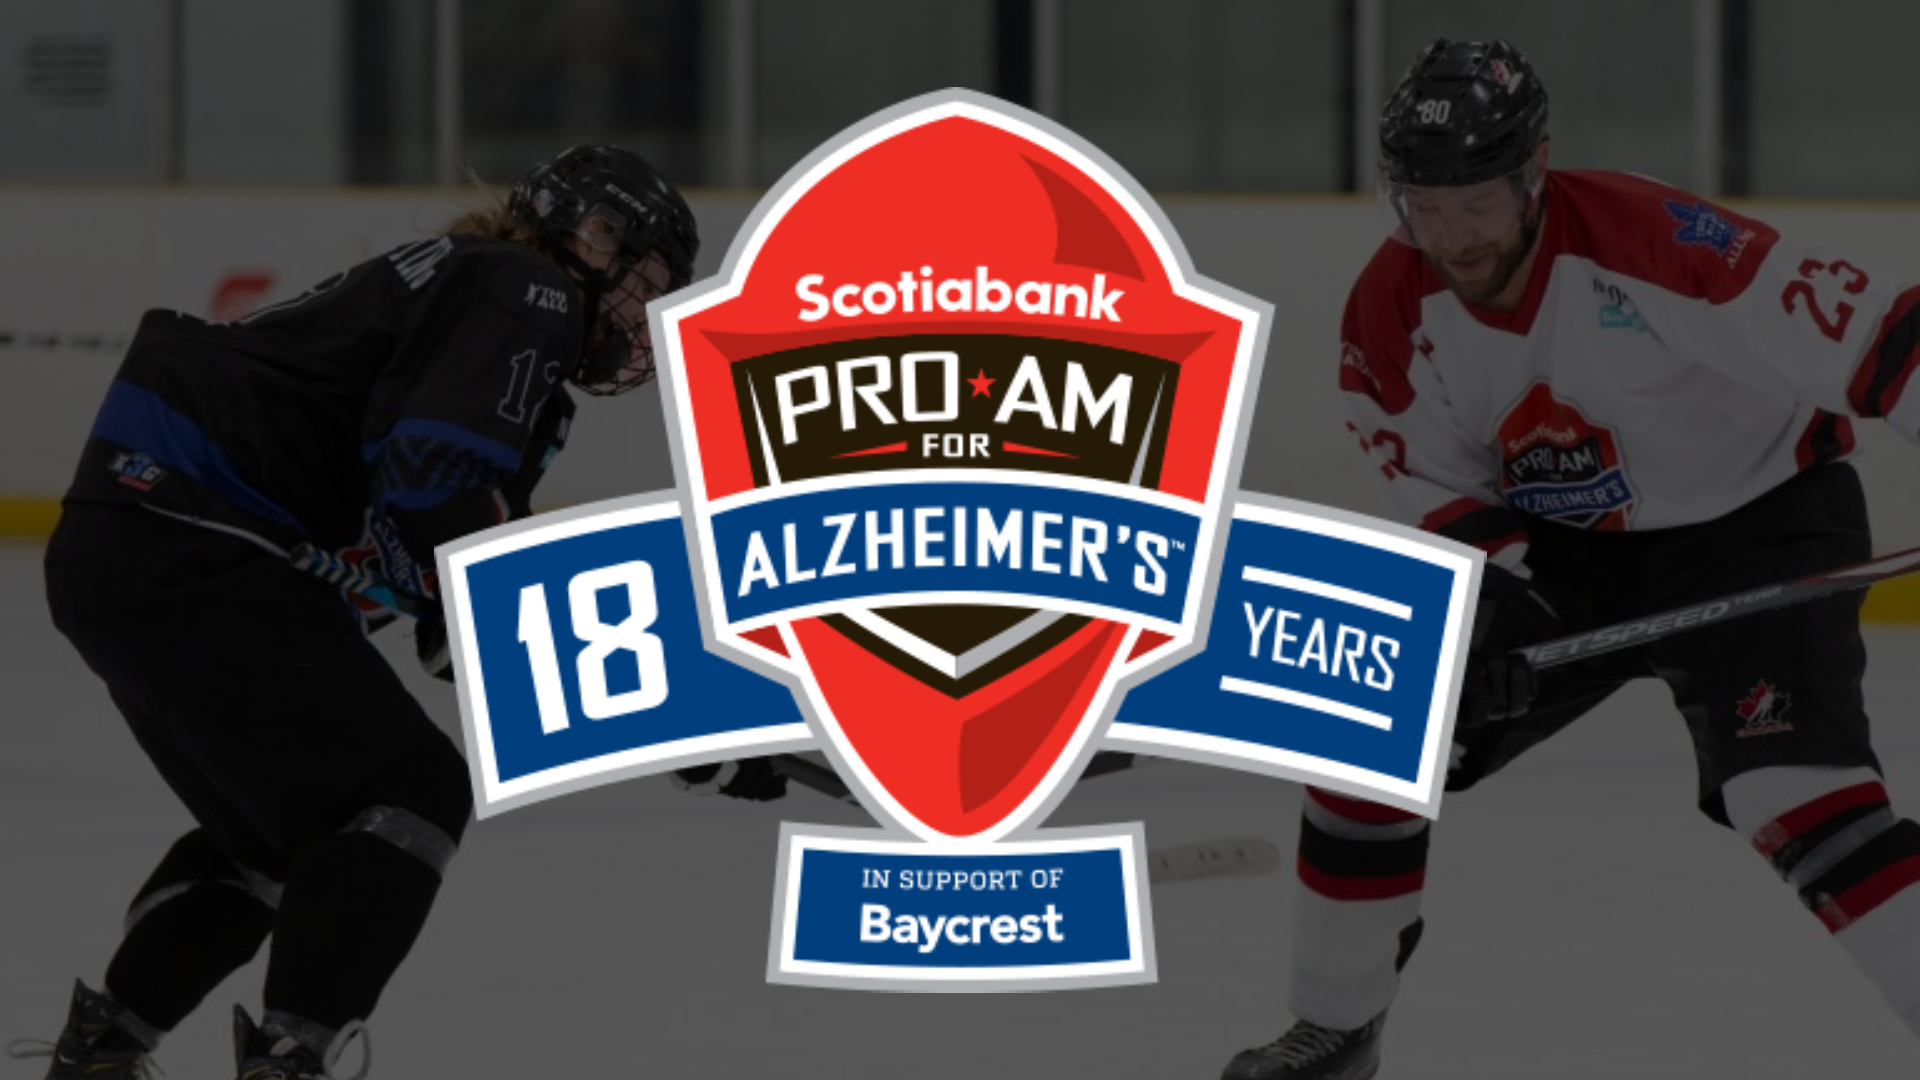 Pro-Am for Alzheimer’s in support of Baycrest